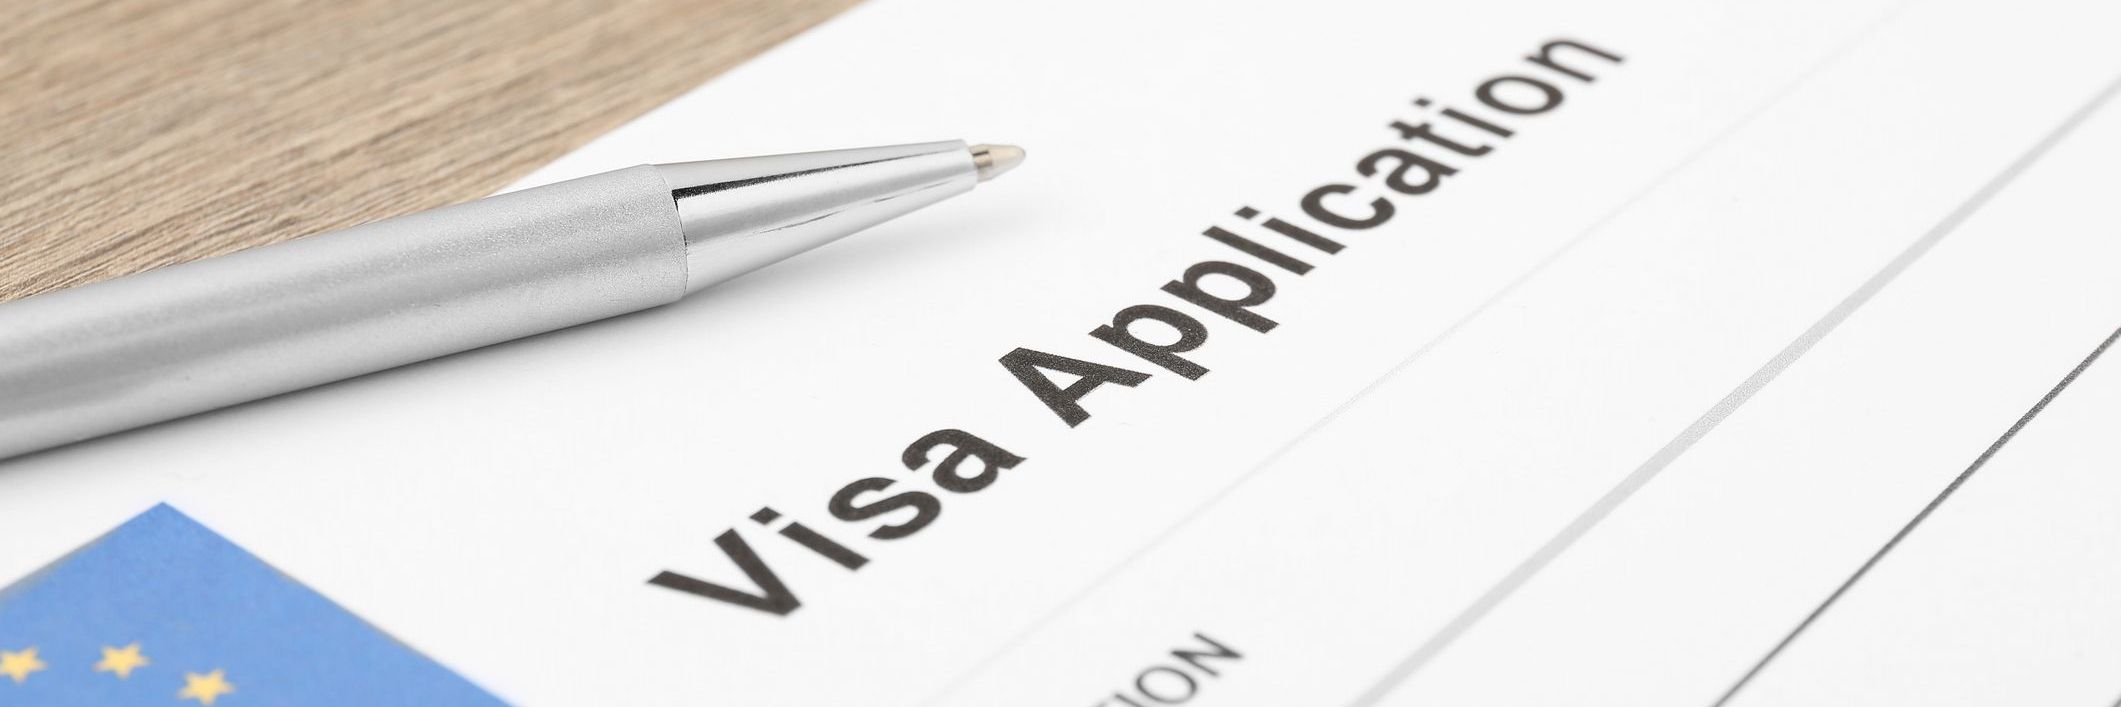 Visa Options for Frontier Workers - A Guide for HR & Business Immigration Professionals